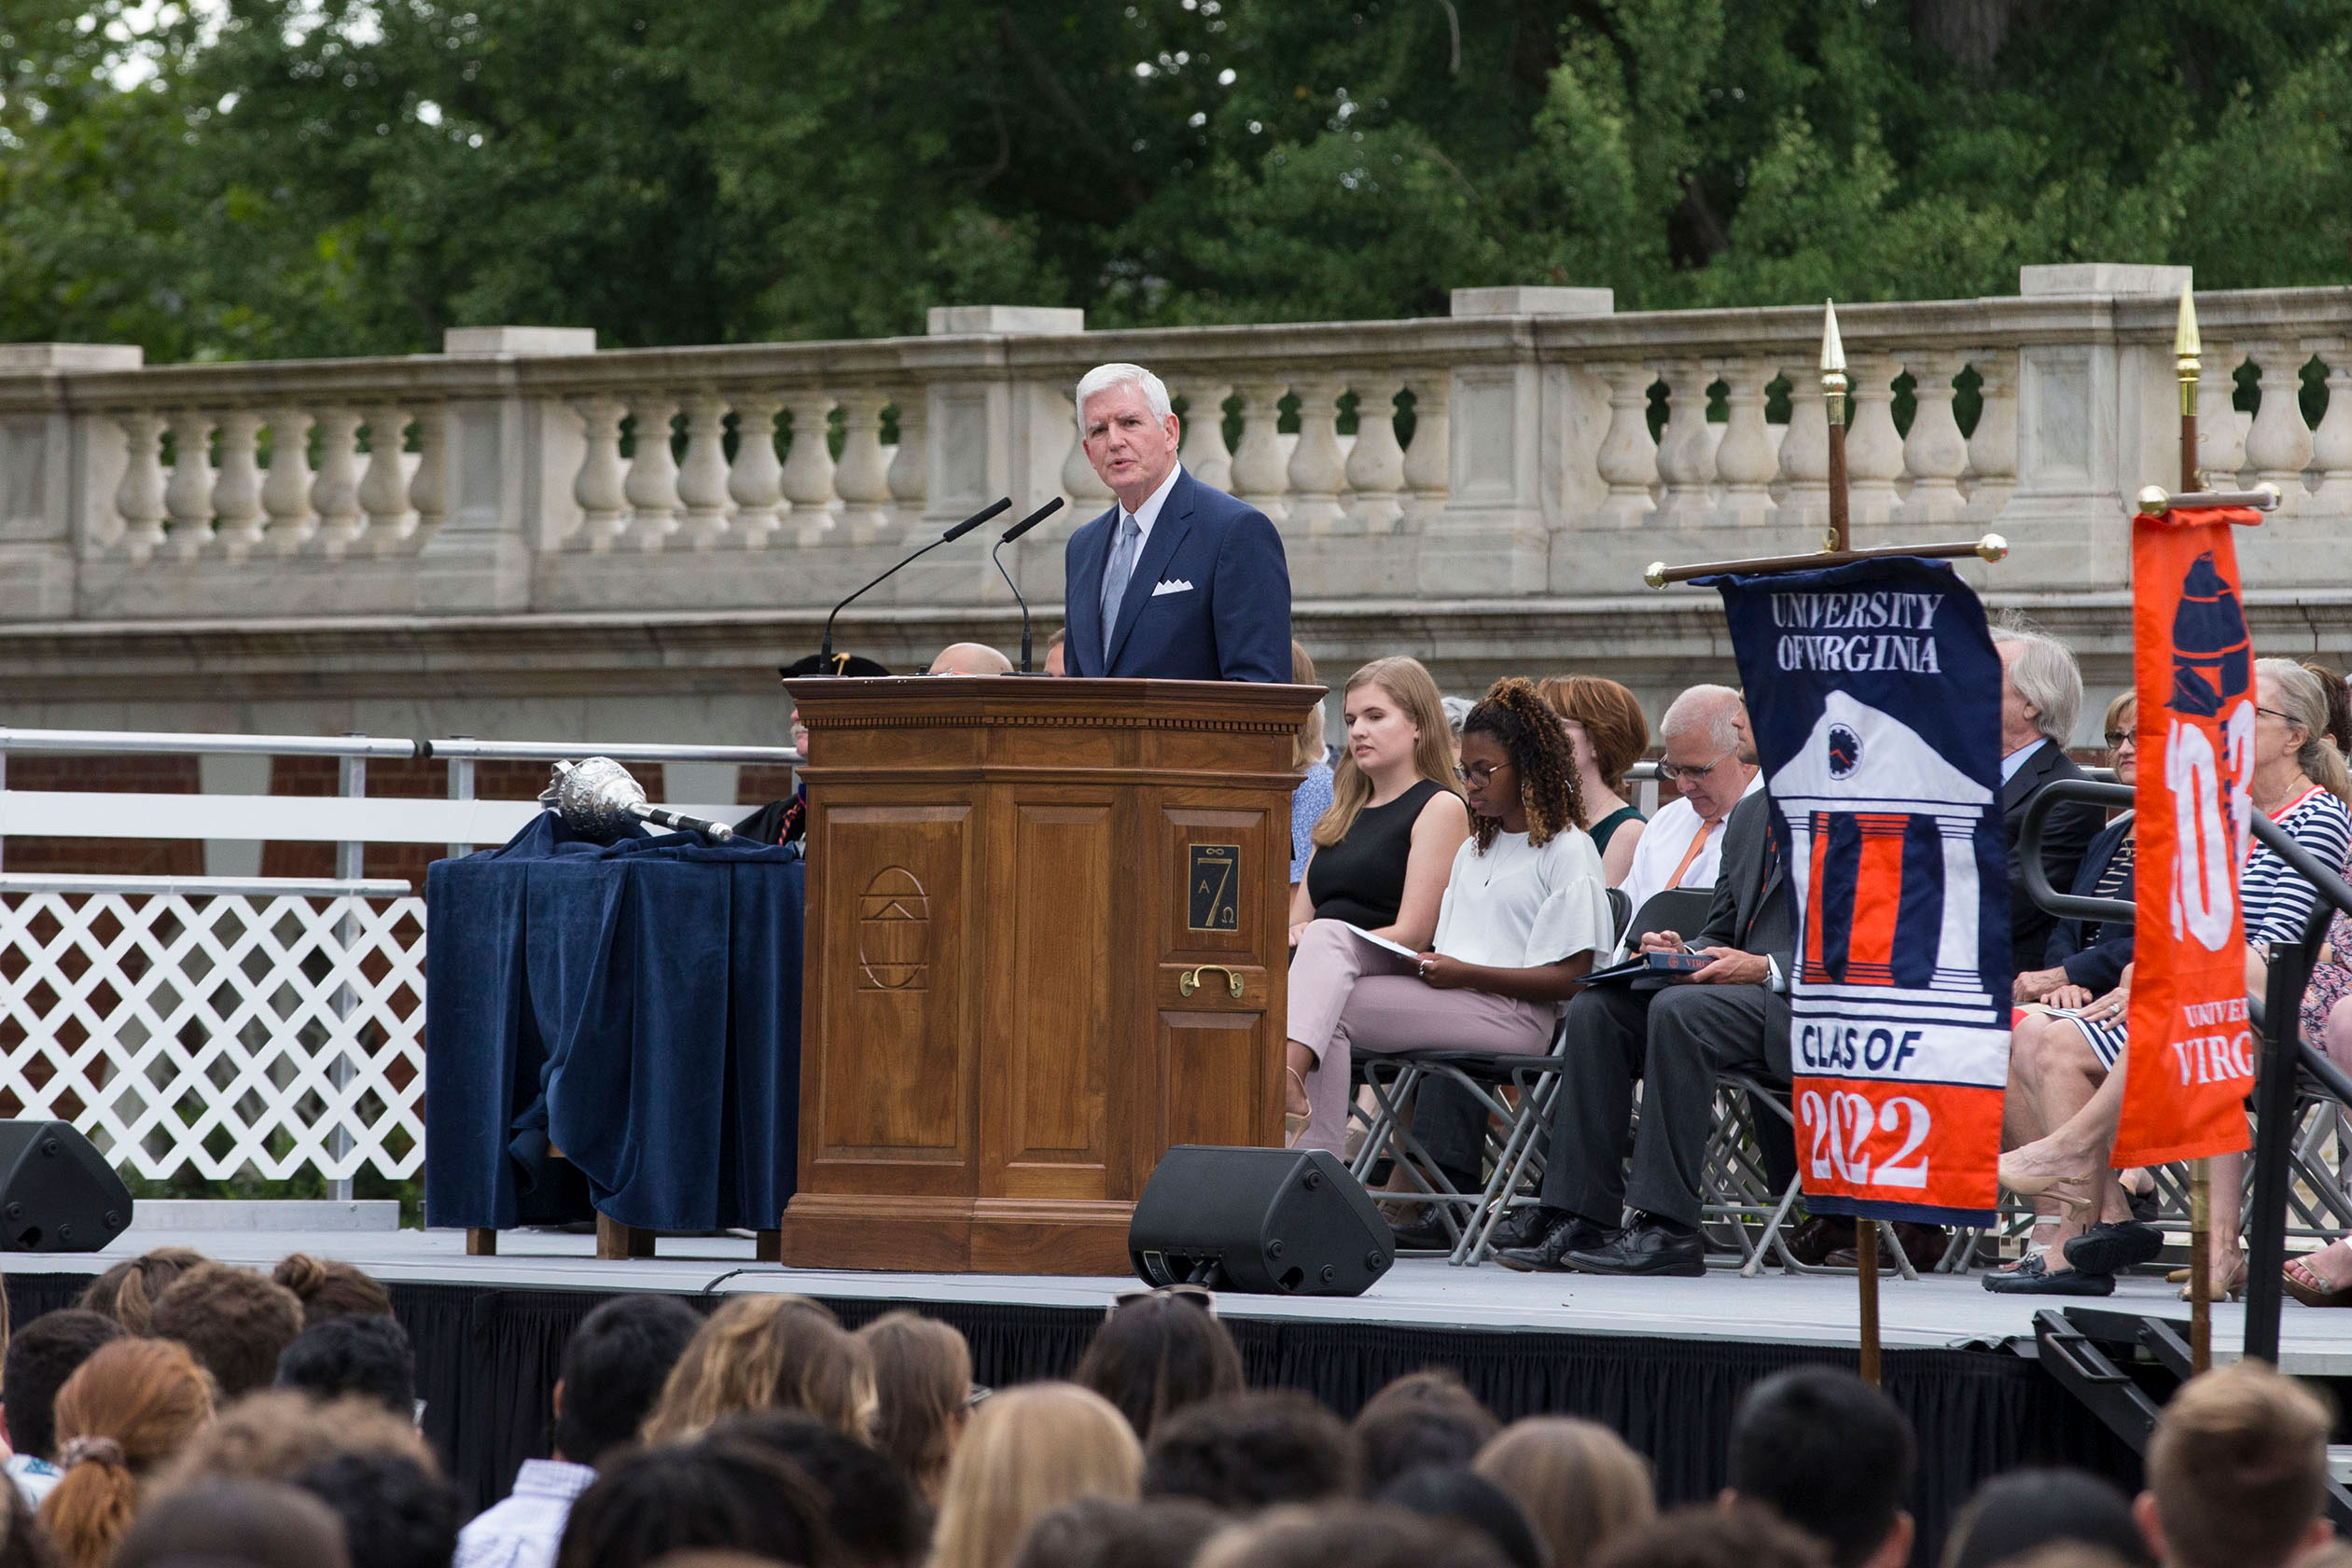 Allen Groves speaks to the class of 2022 at a welcoming ceremony on the Lawn